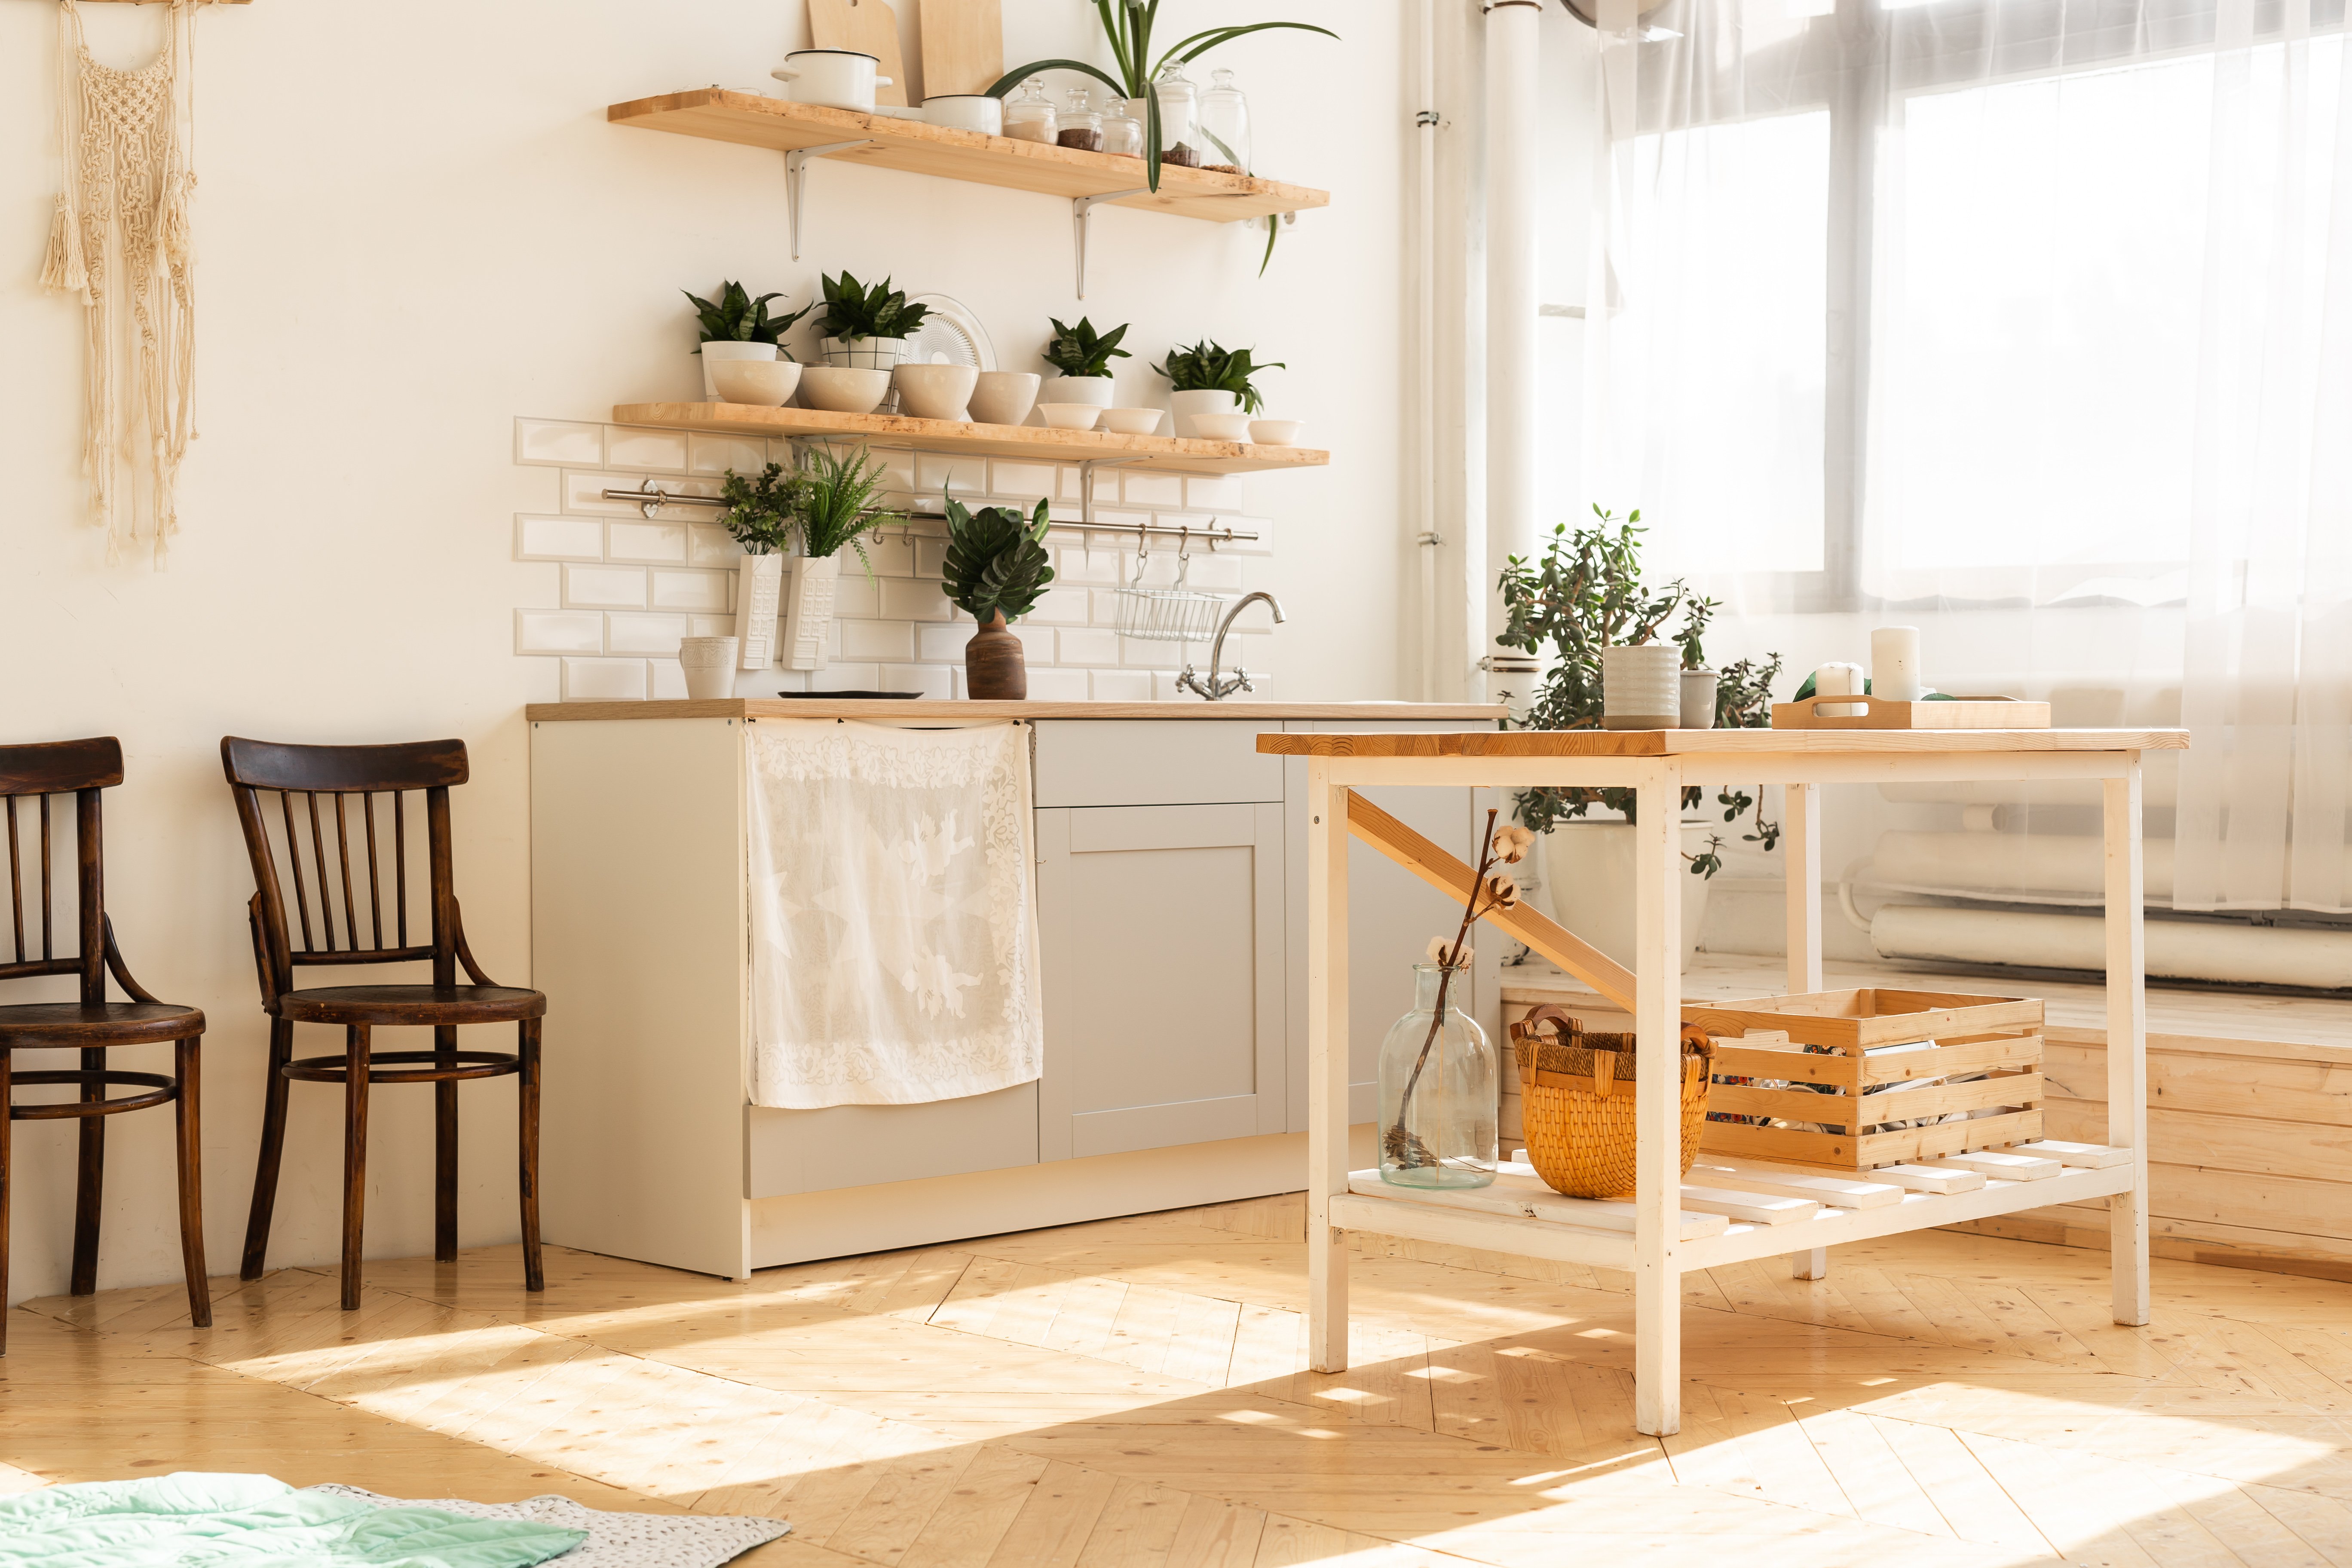 5 Scandinavian-inspired kitchens for your inspiration